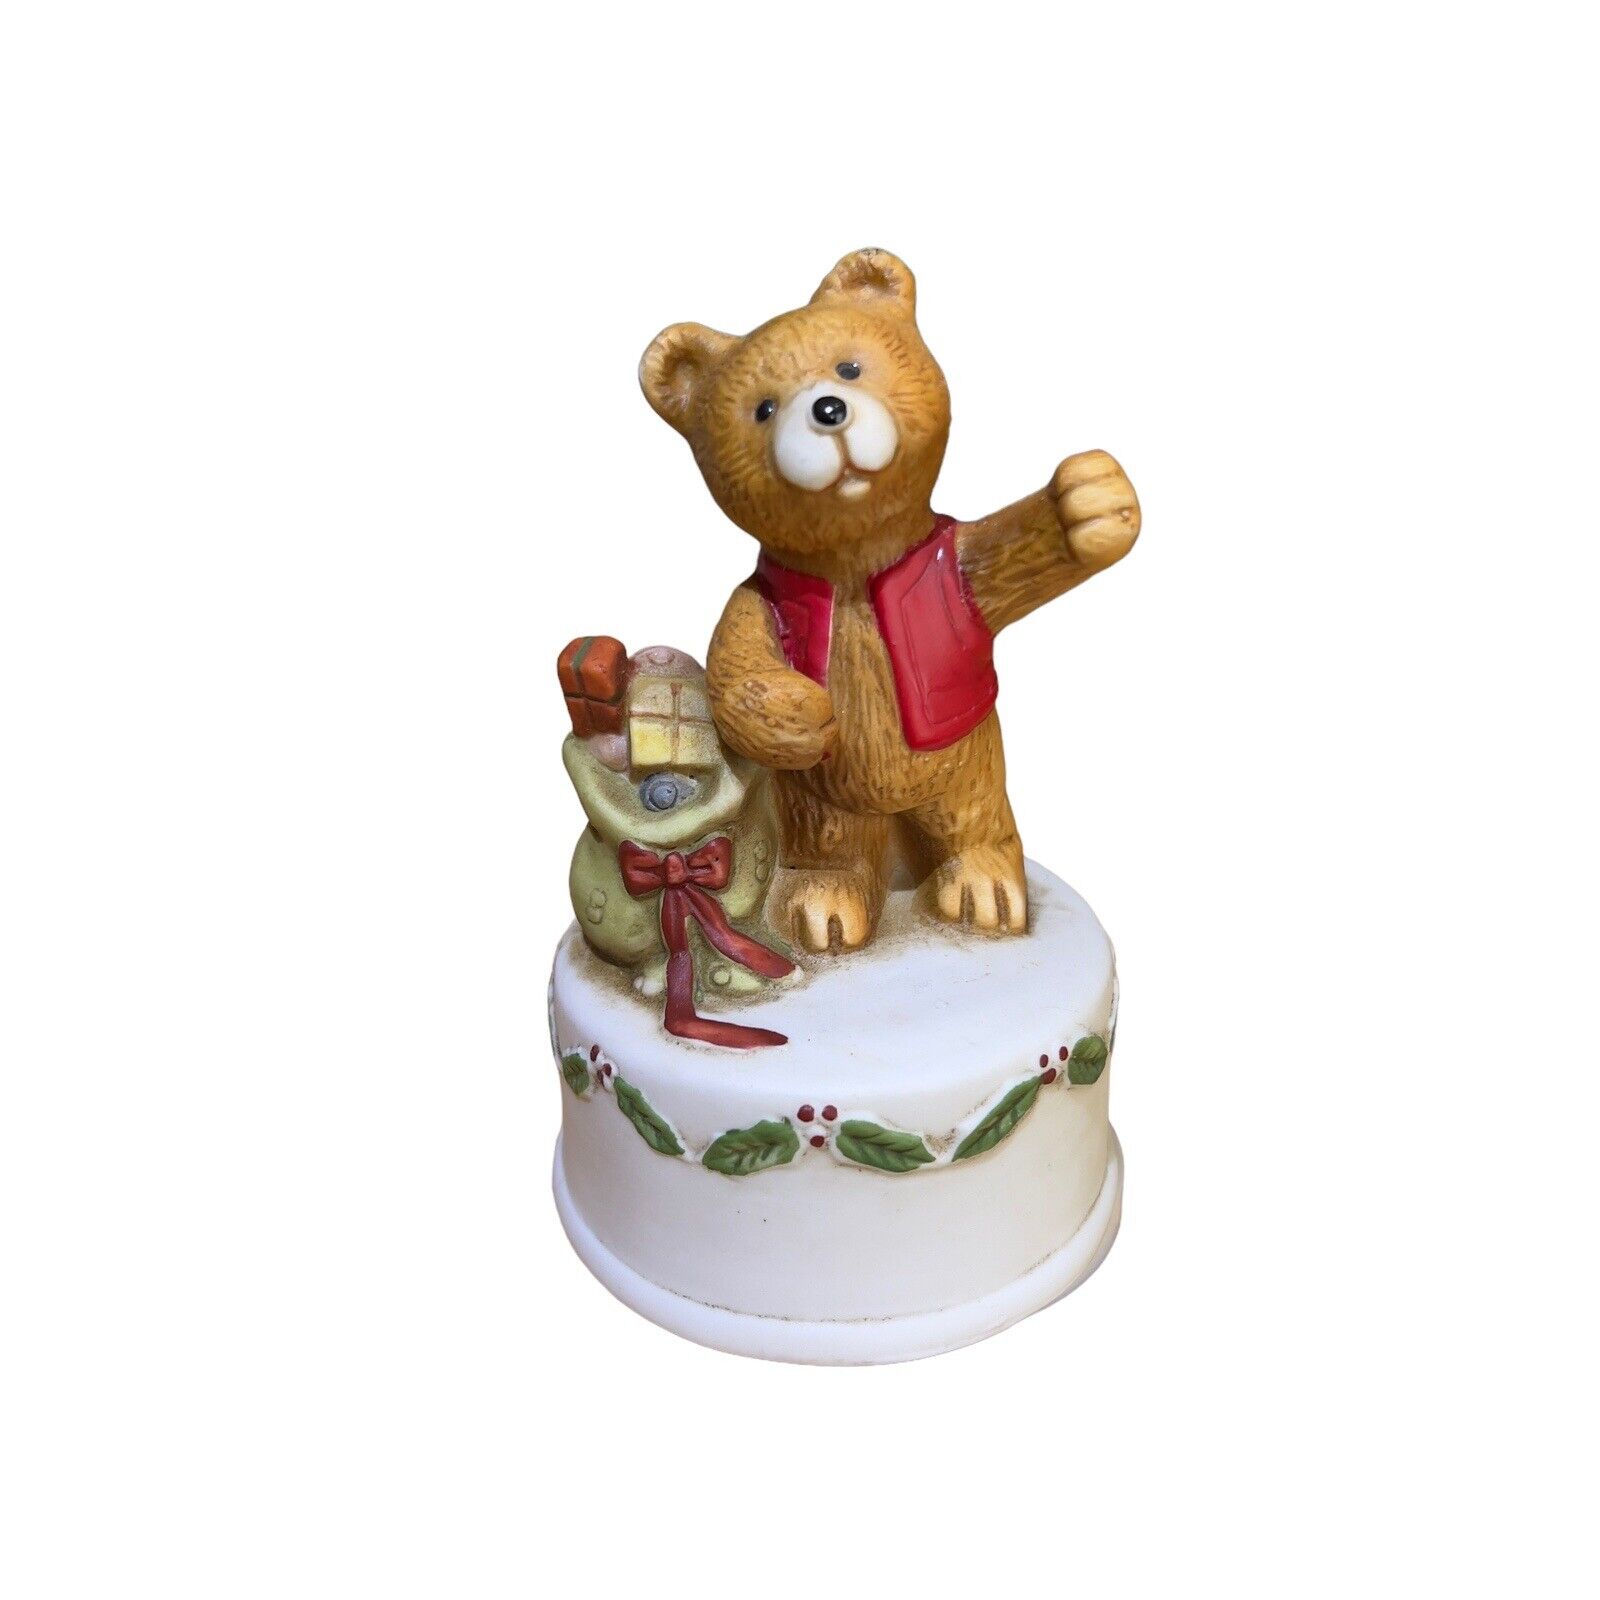 Vintage Ceramic Teddy Bear Standing With Side Bag Presents Music Box Christmas